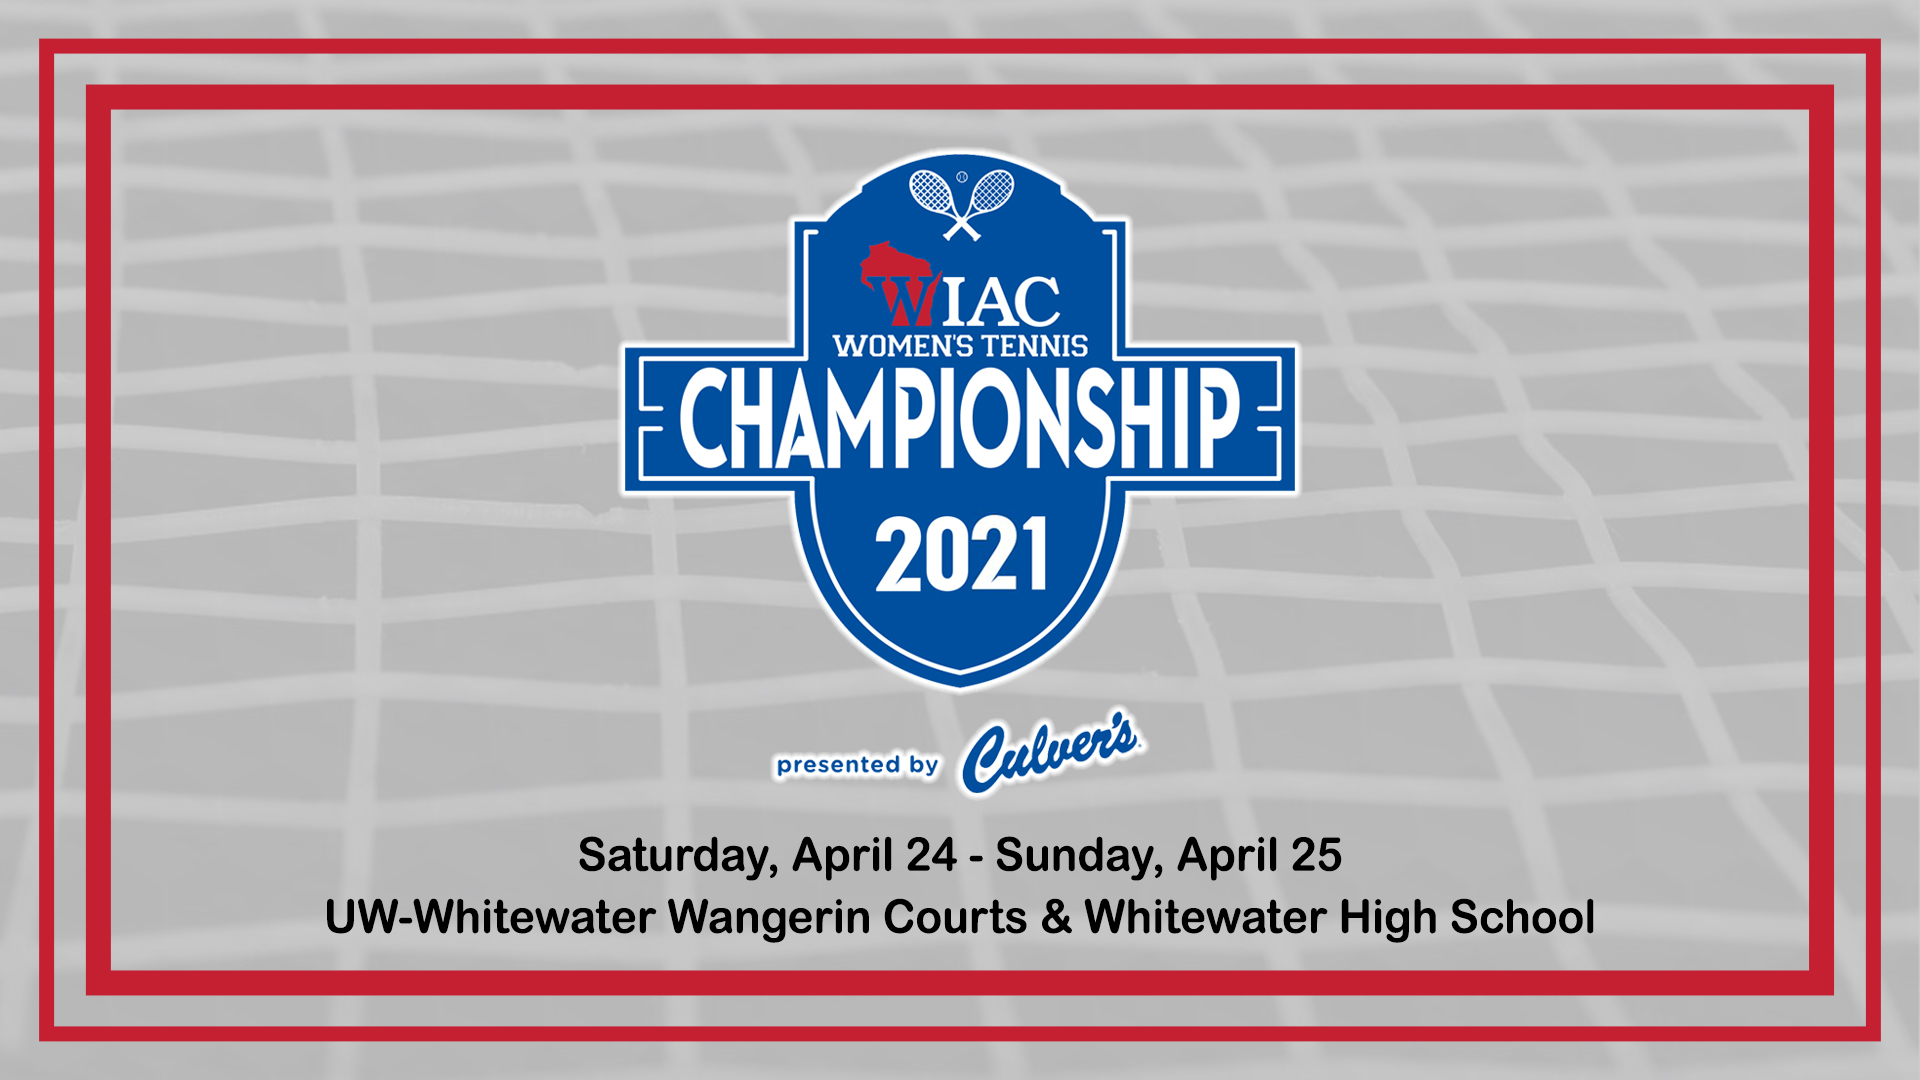 Titans To Play Blugolds In WIAC Championship Opener